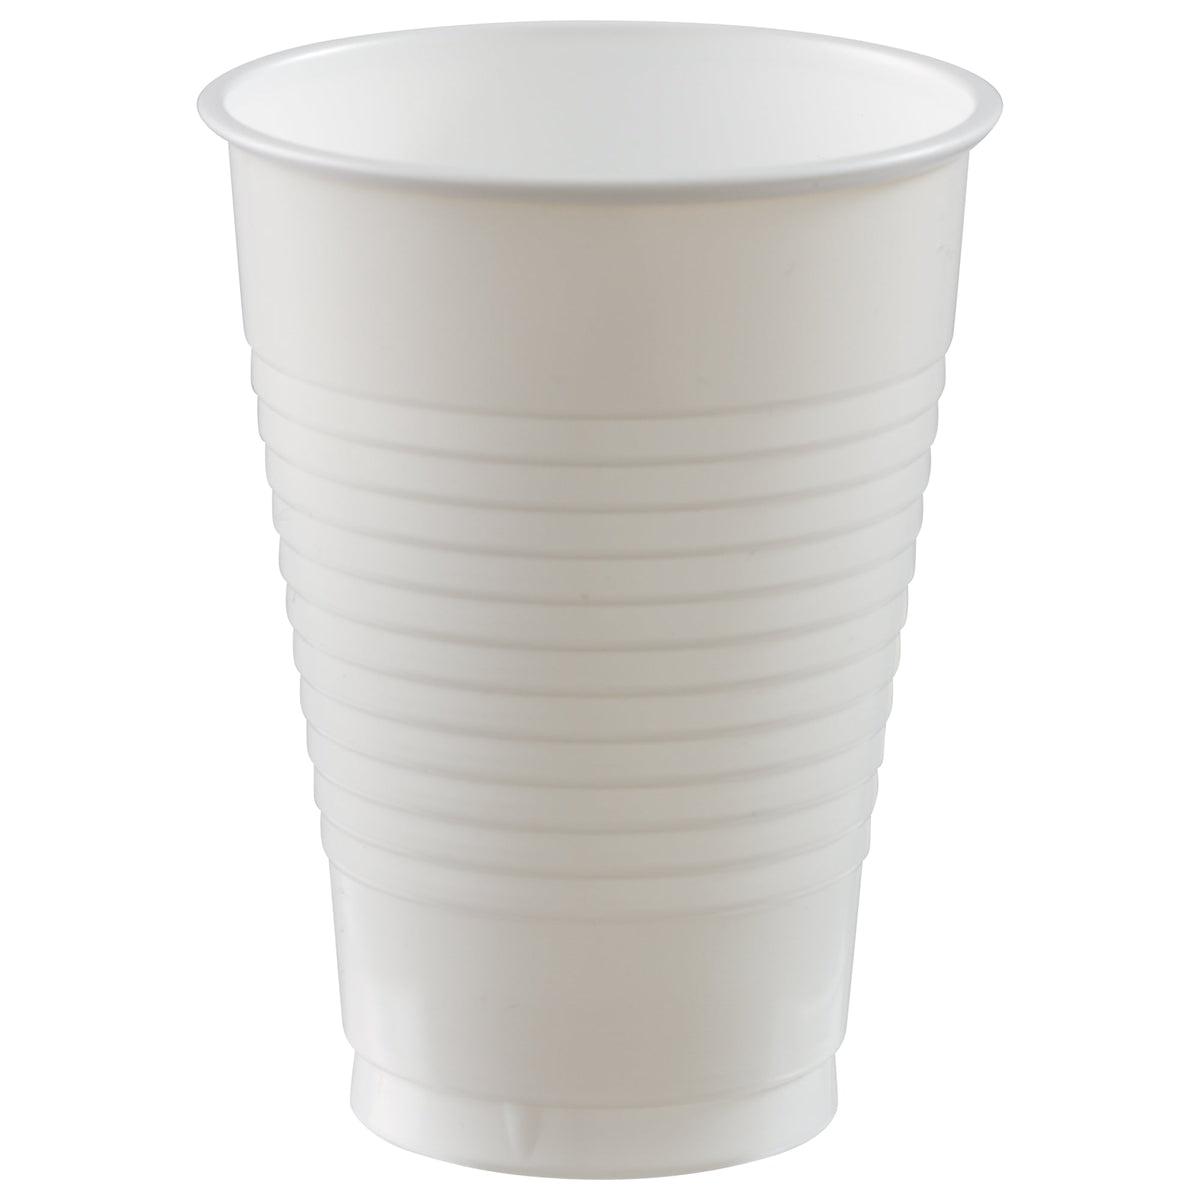 Frosty White 12 oz. Plastic Cups